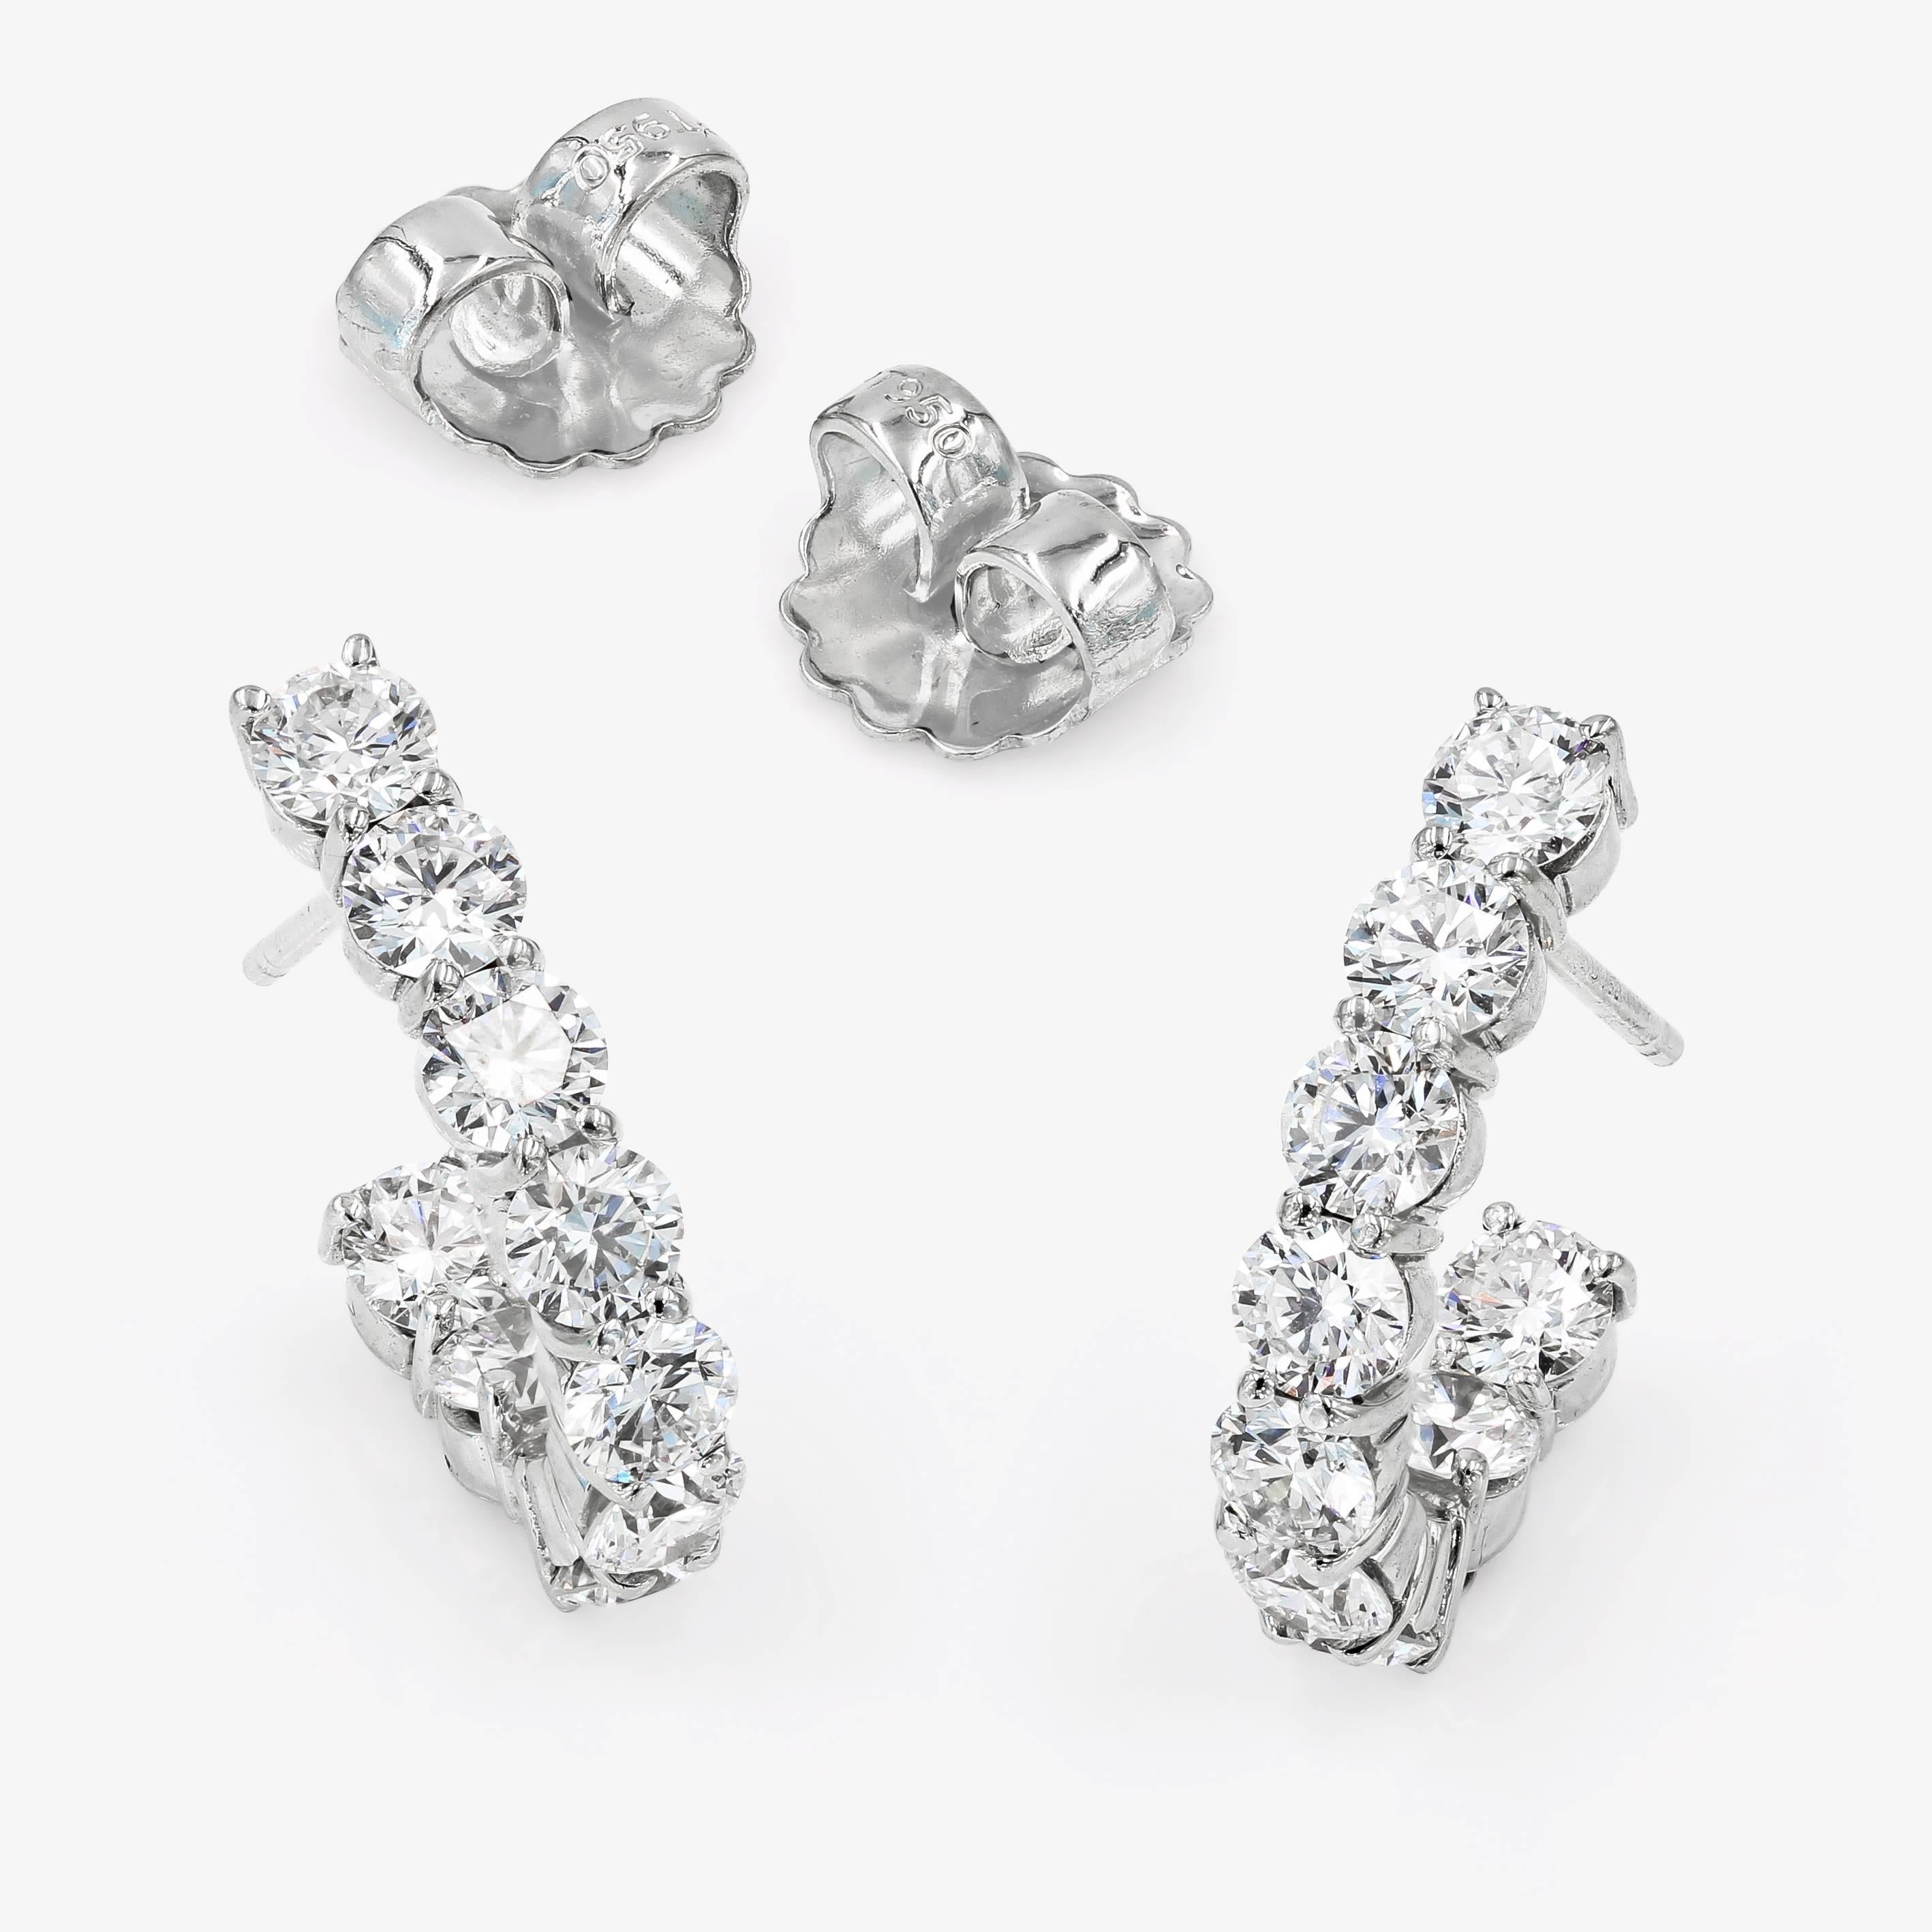 Lester Lampert original J-Hoop earrings are set with 18 ideal cut round diamonds= 3.96cts. t.w. 
(the diamonds are F/G in color and VS in clarity) in 18kt. white gold. The earrings are finished with a post and clutch back.

Every Lester Lampert